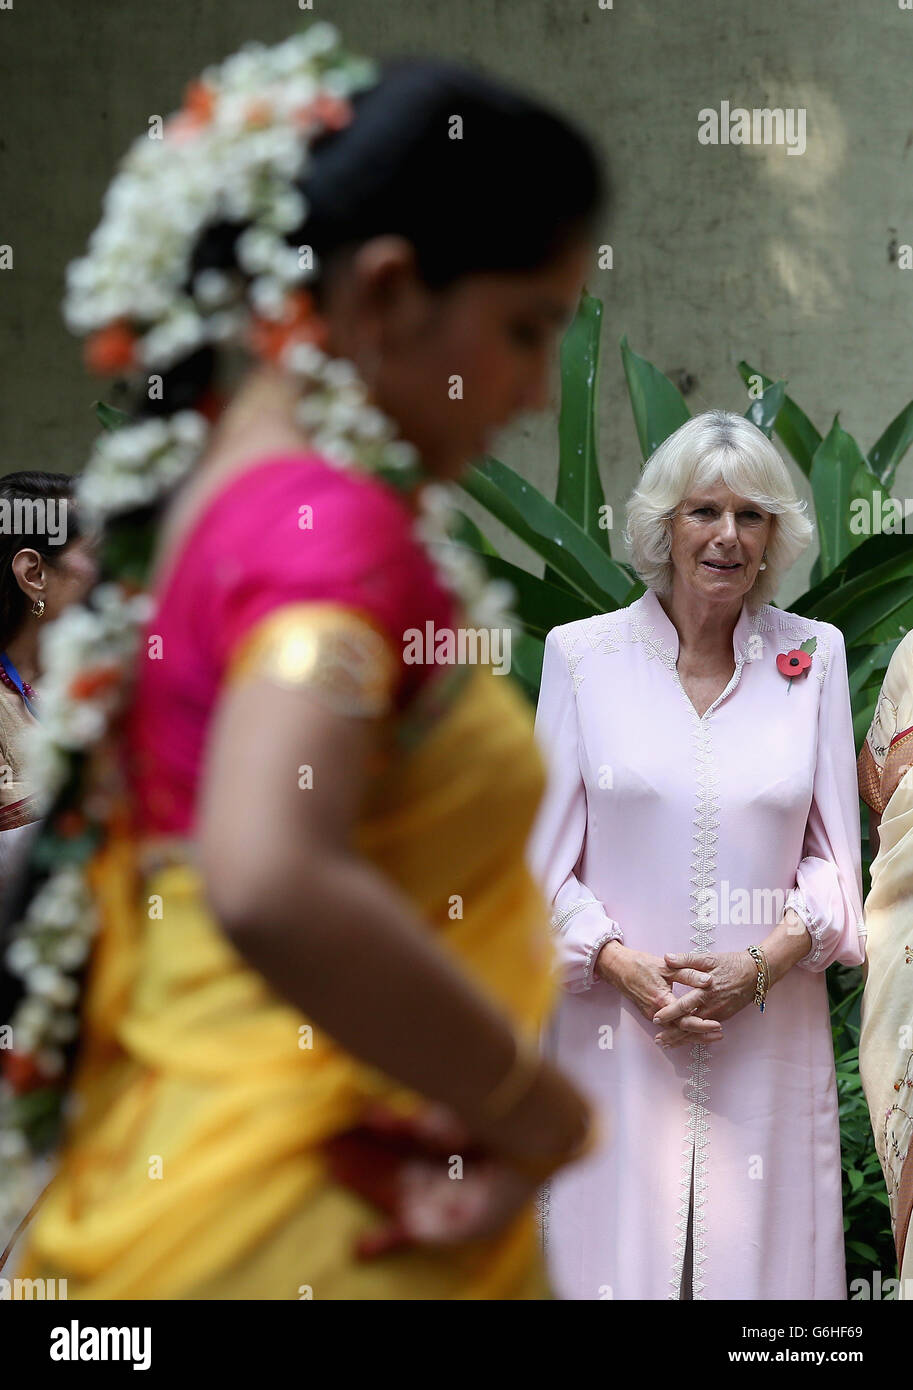 The Duchess of Cornwall watches dancers at Asha Sadan (House of Hope) for children who have been abandoned or abused, in Mumbai, on the fourth day of their official visit to India and Sri Lanka. PRESS ASSOCIATION Photo. Picture date: Saturday November 9, 2013. See PA story ROYAL Tour. Photo credit should read: Chris Jackson/PA Wire Stock Photo